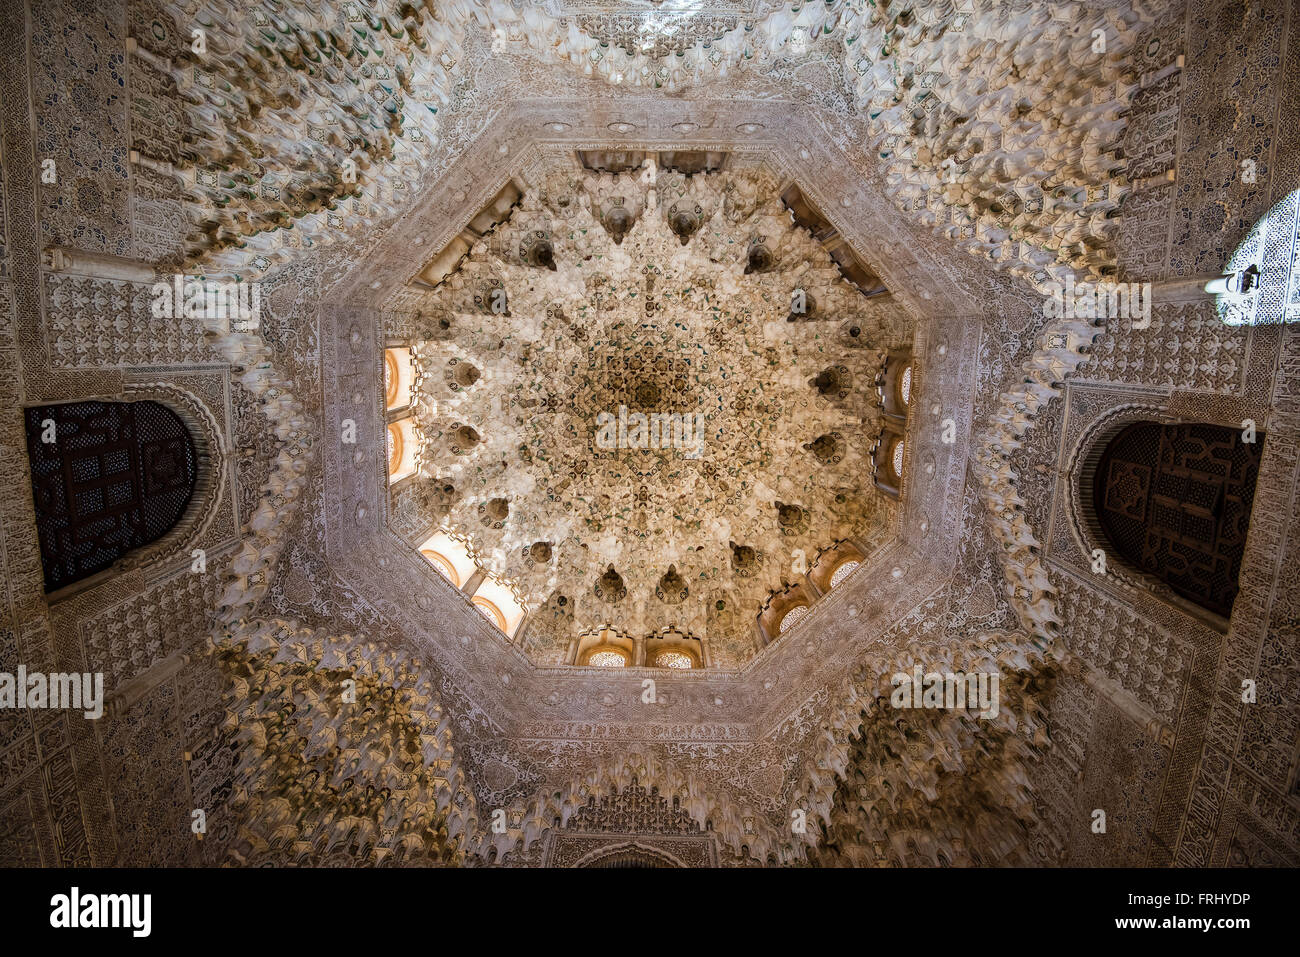 Muqarnas ceiling decoration and dome, Palace of the Lions, Alhambra palace, Granada, Andalusia, Spain Stock Photo